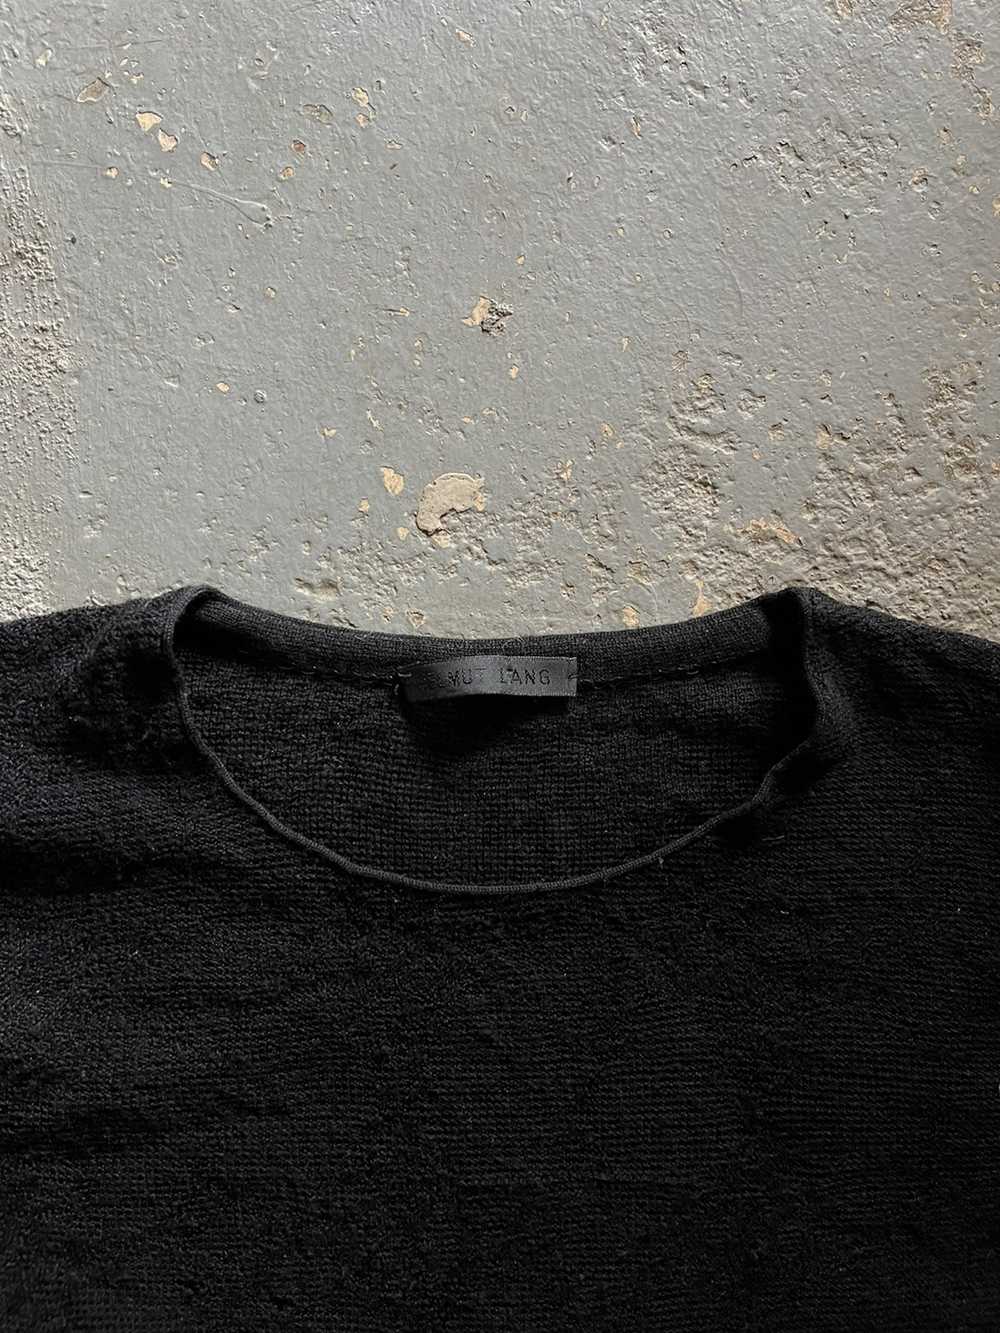 Helmut Lang AW03 Cropped Knit - image 2